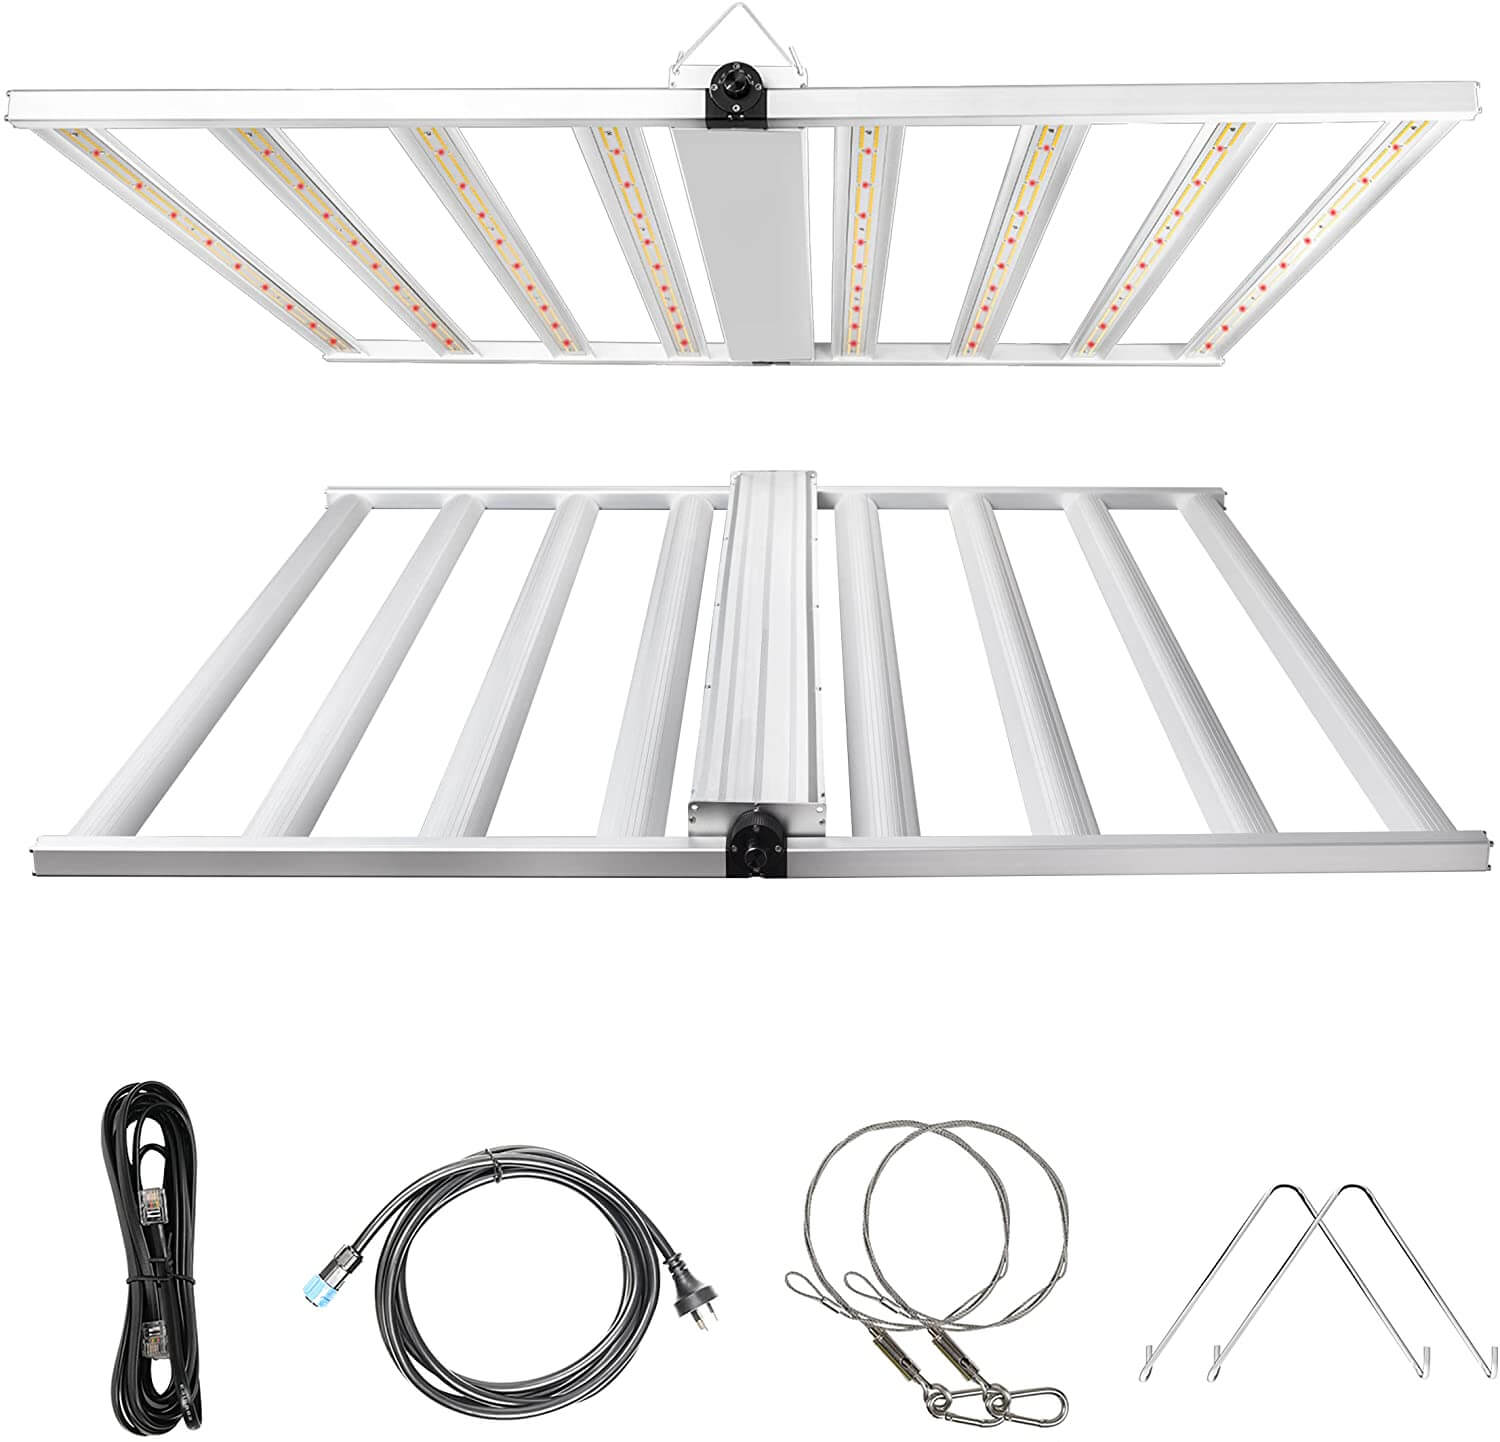 CT-800 Full Spectrum LED Grow Light -800 Watts, 5'x5'/6'x6', Dimmable, High Efficacy, Commercial Use | Cultiuana